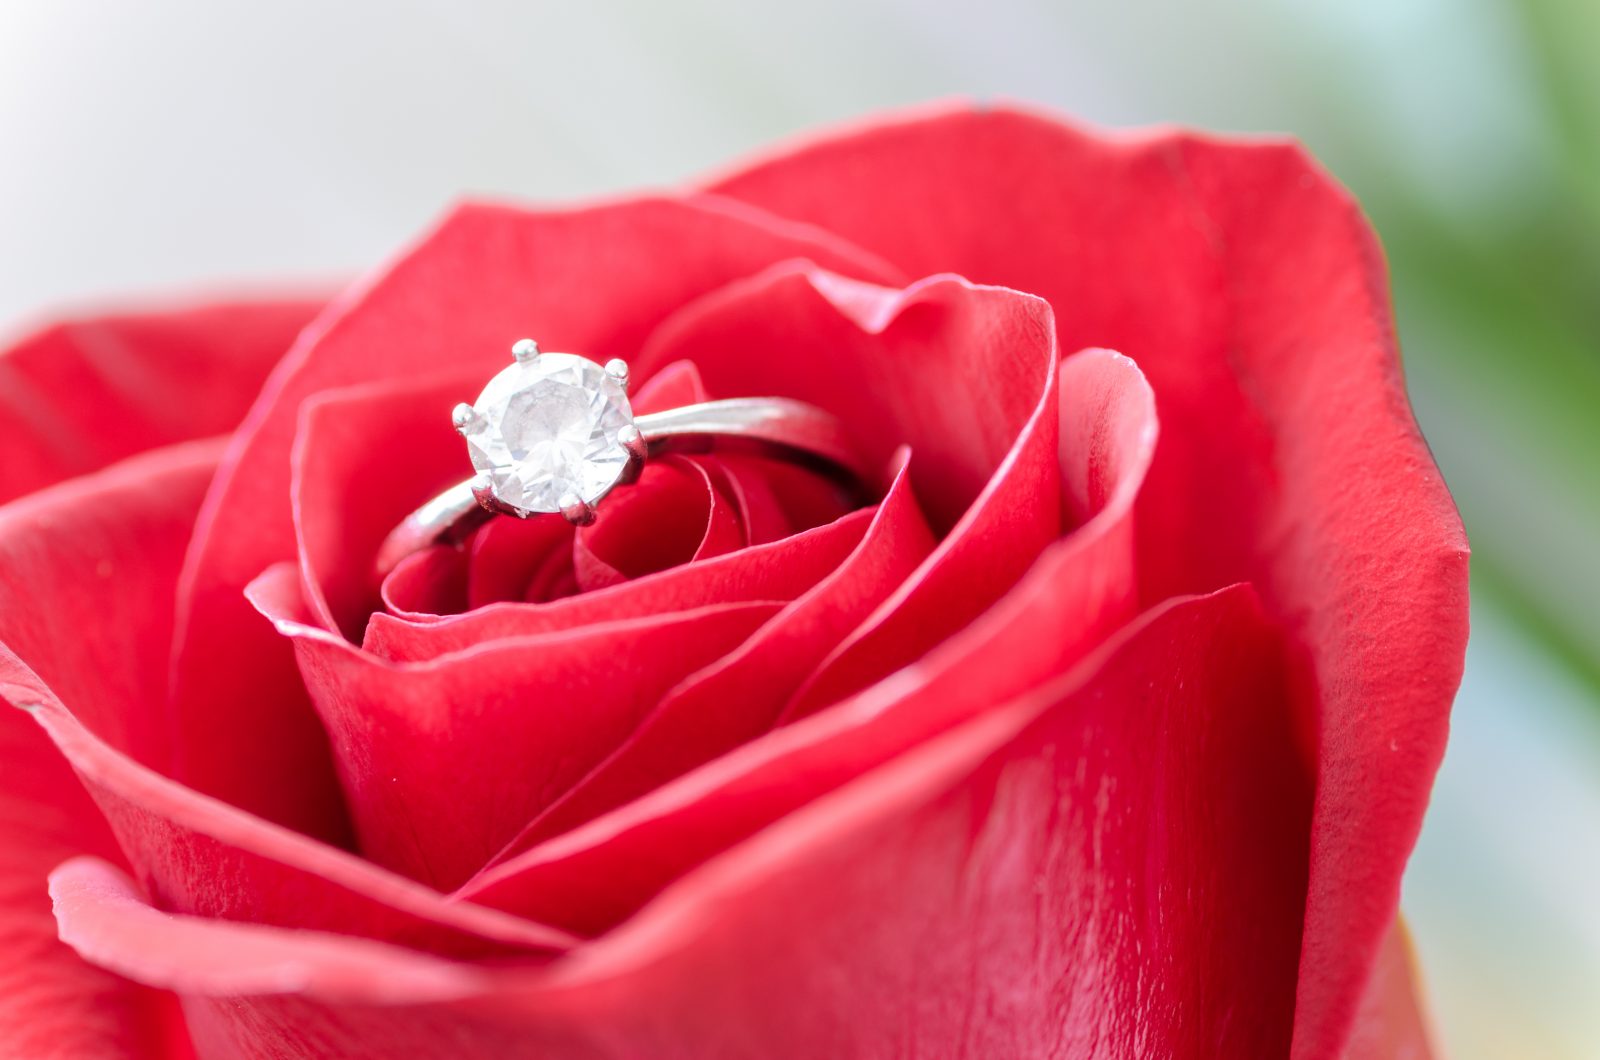 Silver diamond embed ring on red rose